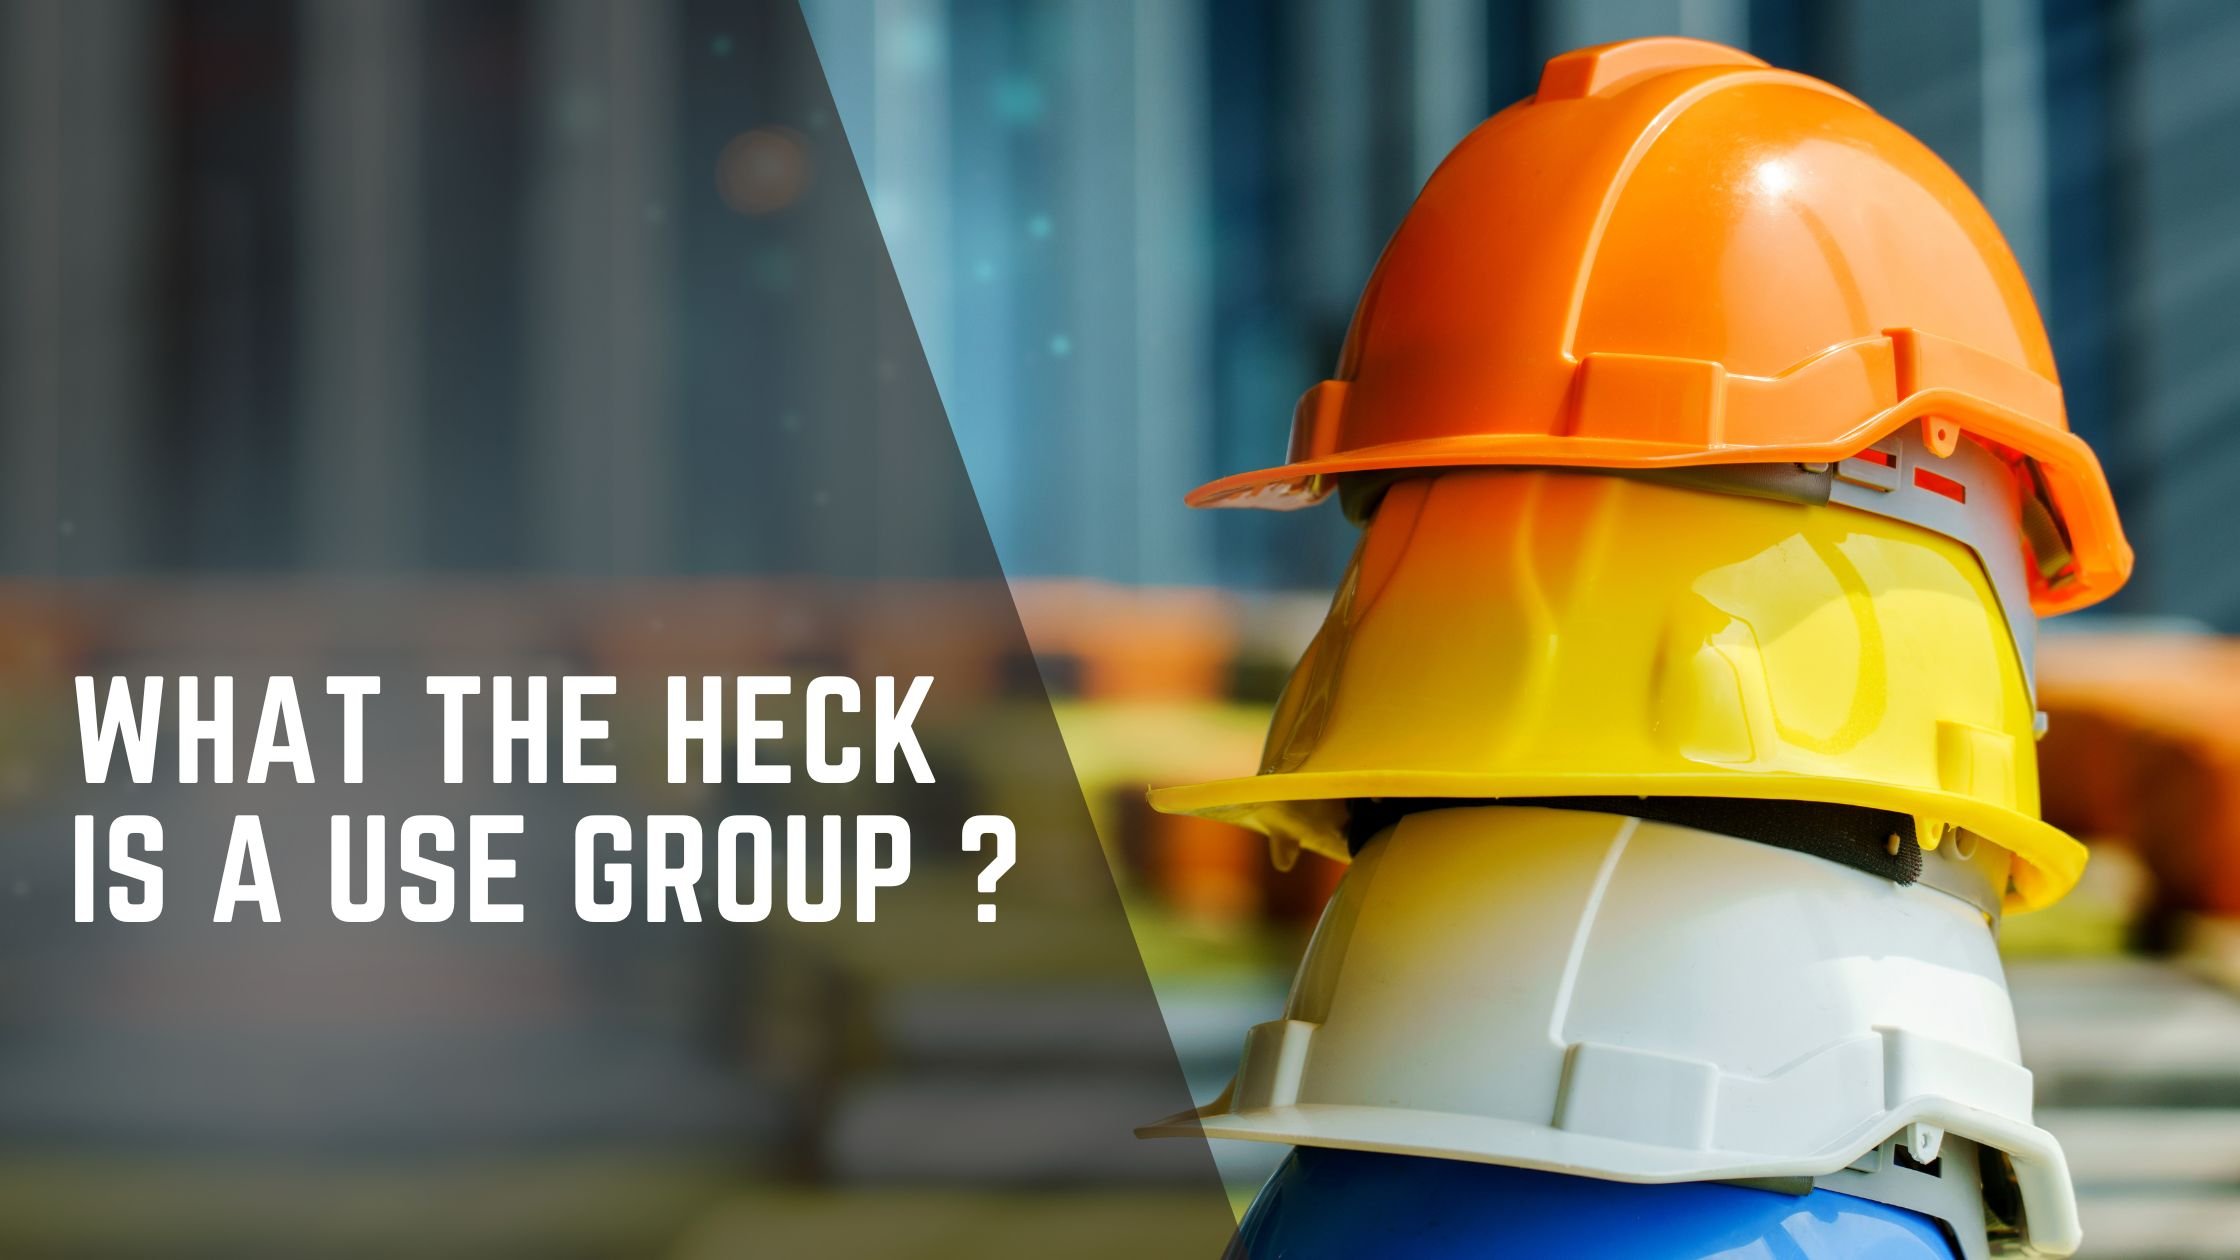 What is a use group?